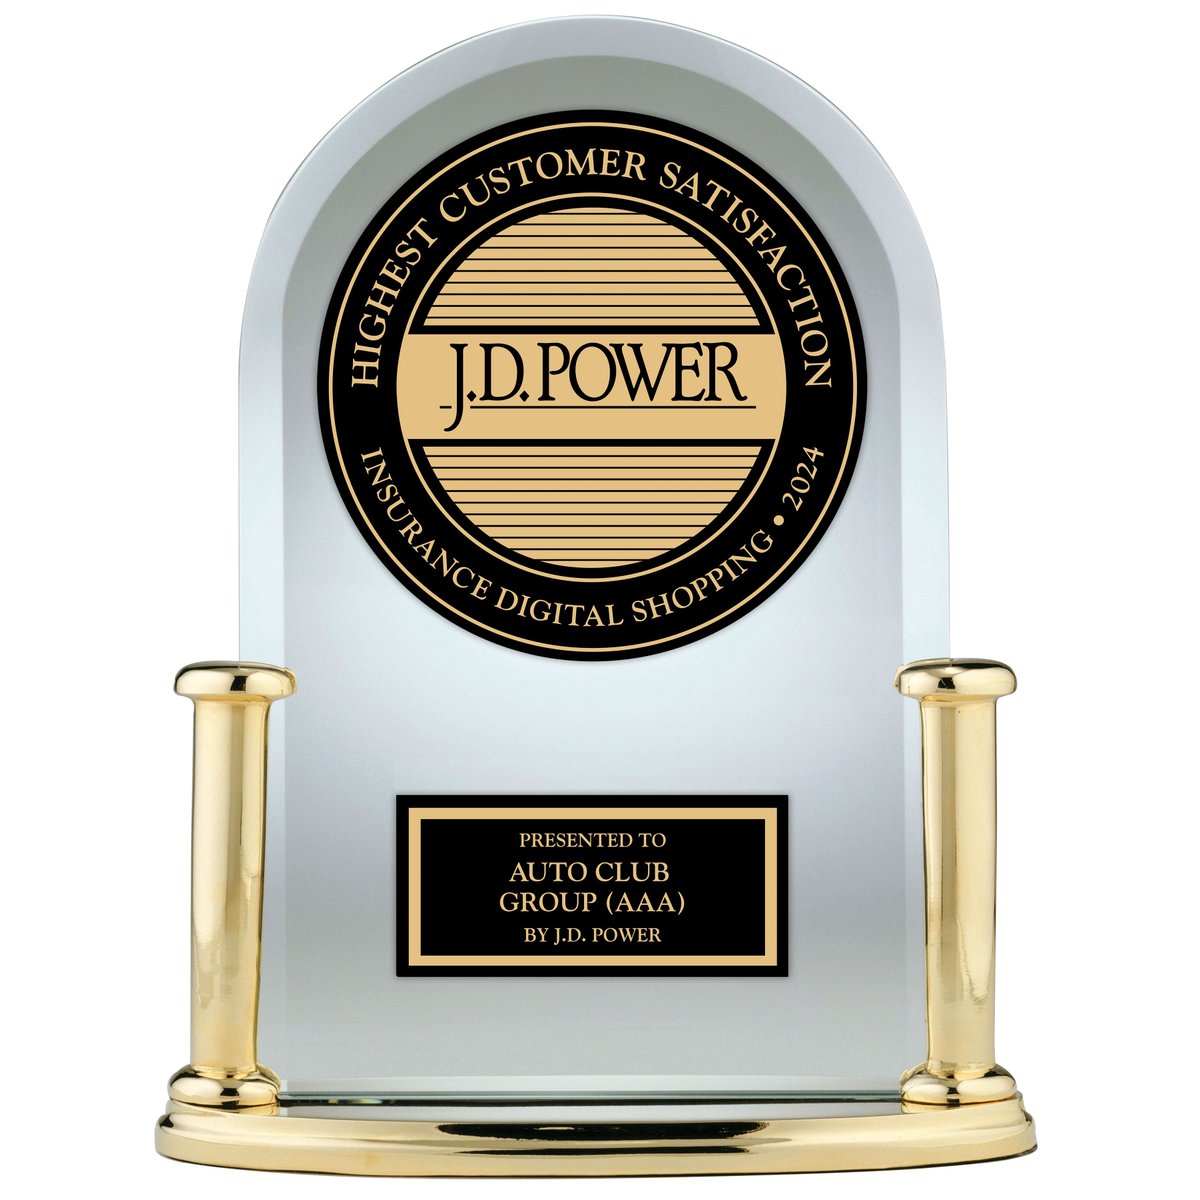 We’re honored! We've been ranked #1 by J.D. Power for our “Digital Insurance Shopping Experience.” Thank you to our dedicated team and valued members for helping us achieve this recognition. 

More here: bit.ly/3QYQcqt
#JDPower #DigitalExcellence #Insurance